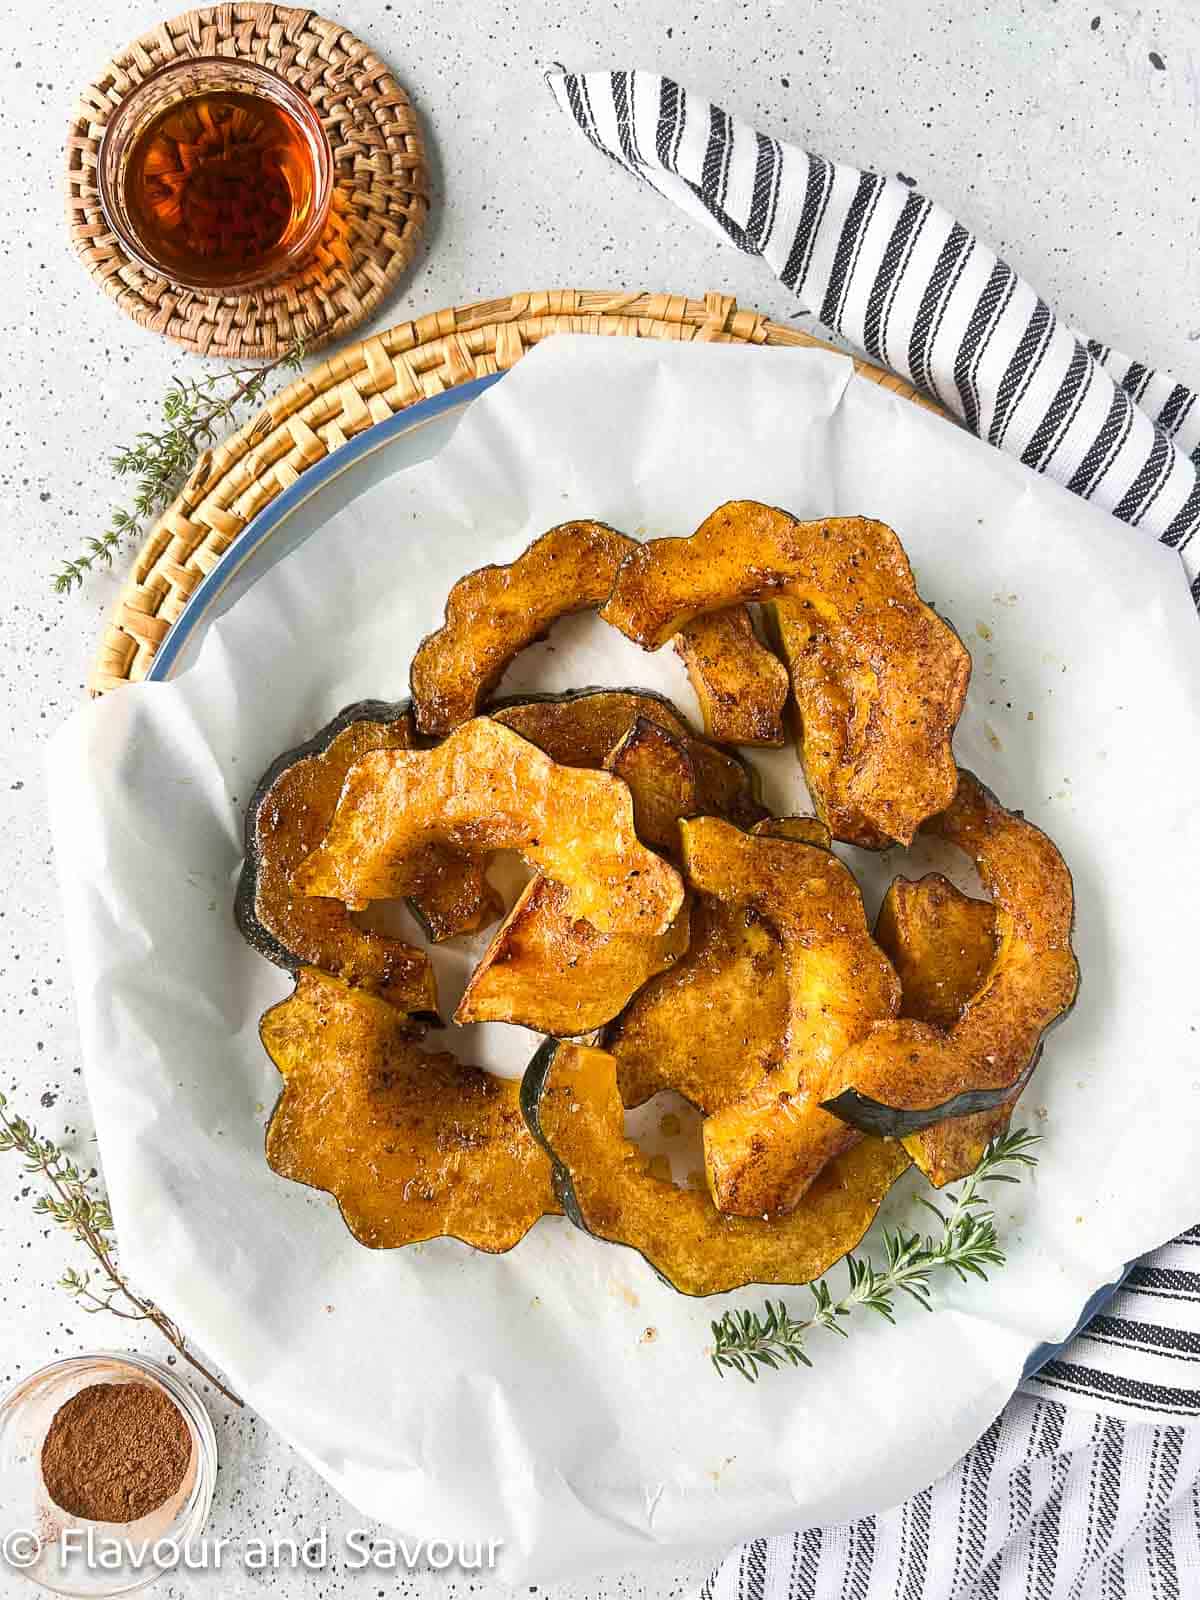 A platter of acorn squash slices cooked in an air fryer with small bowls of maple syrup and cinnamon nearby.